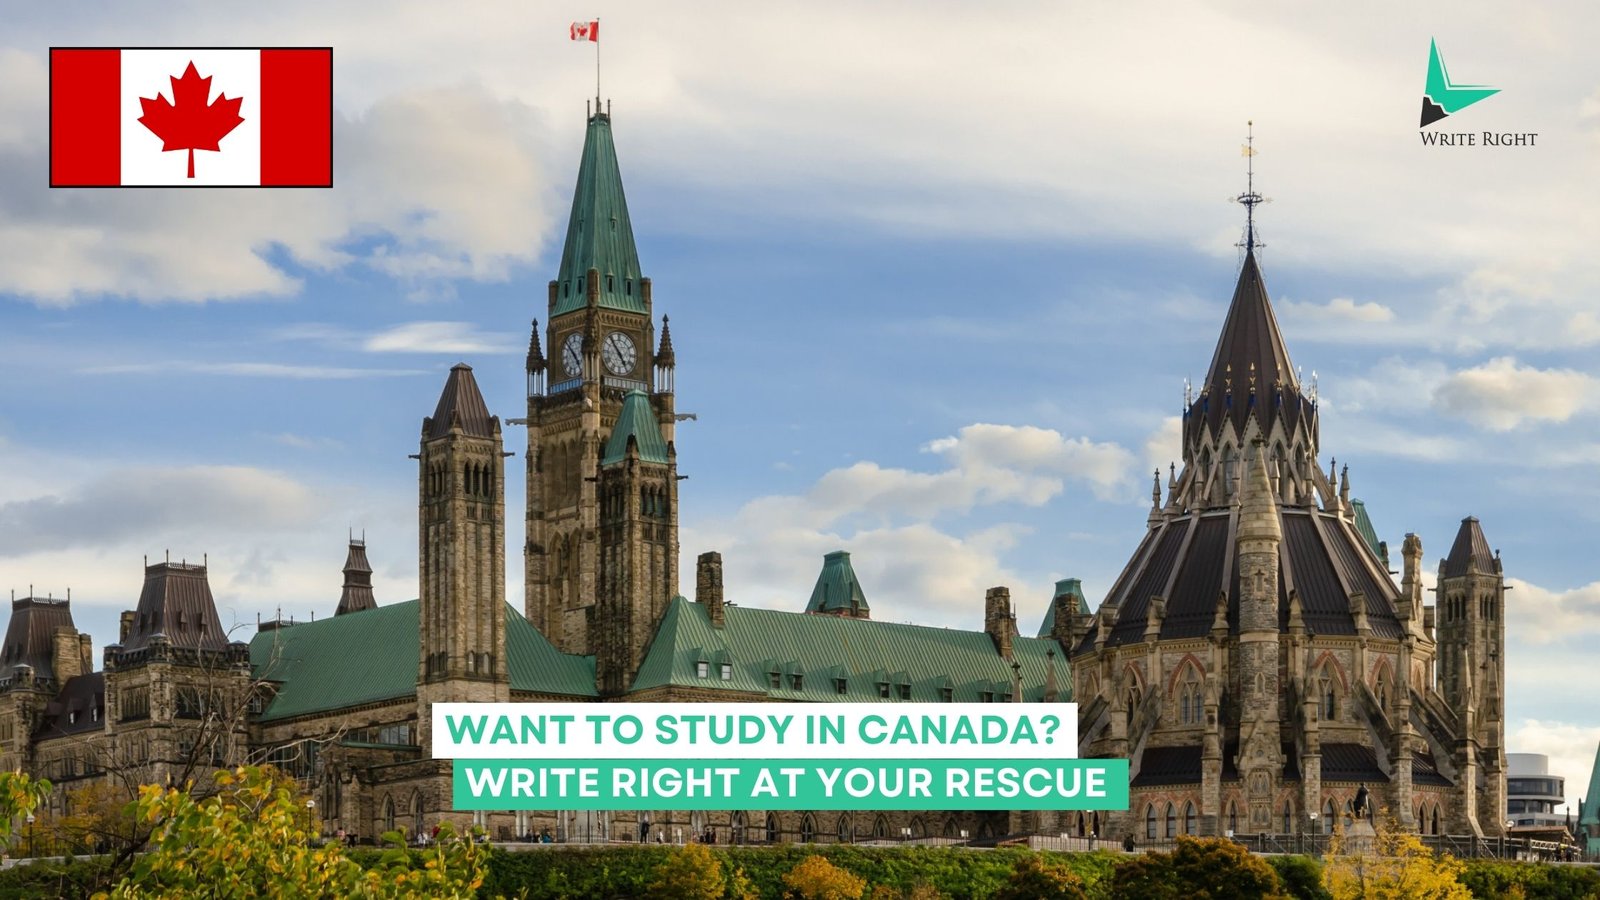 Are you a student wanting to study in Canada? Write Right will help you secure your admission to Canadian universities.